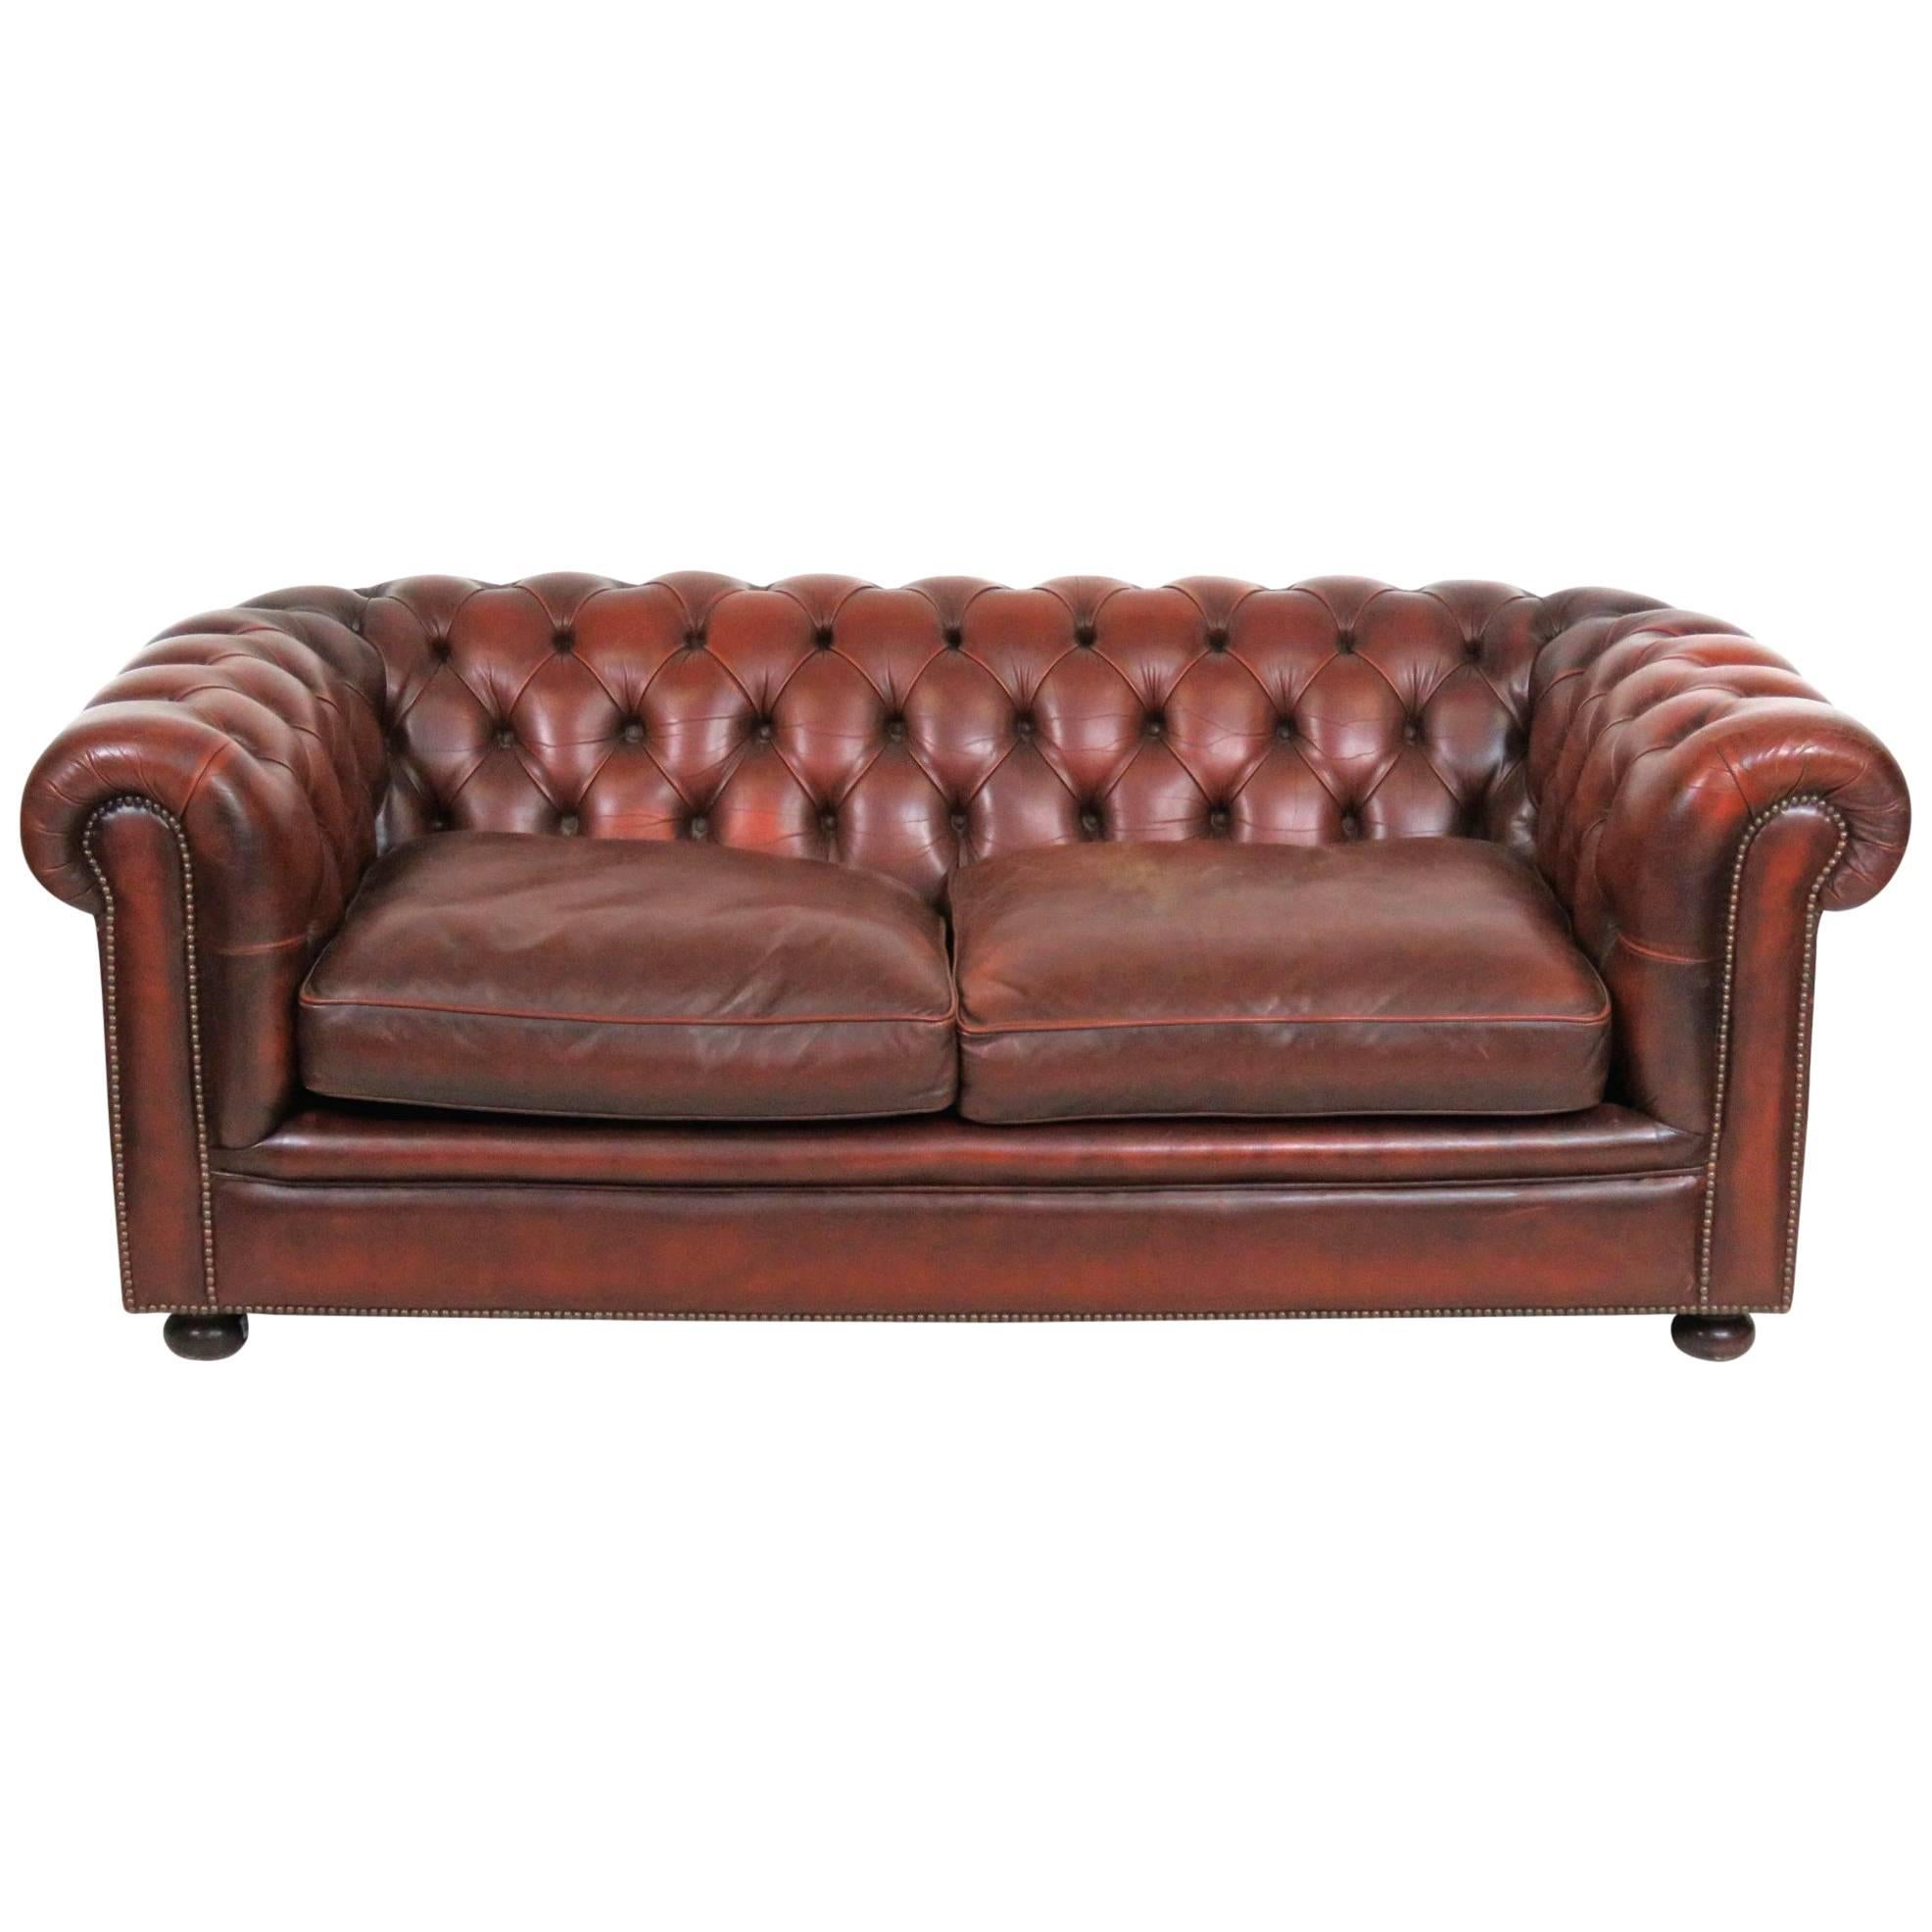 Antique English Leather Chesterfield Sofa